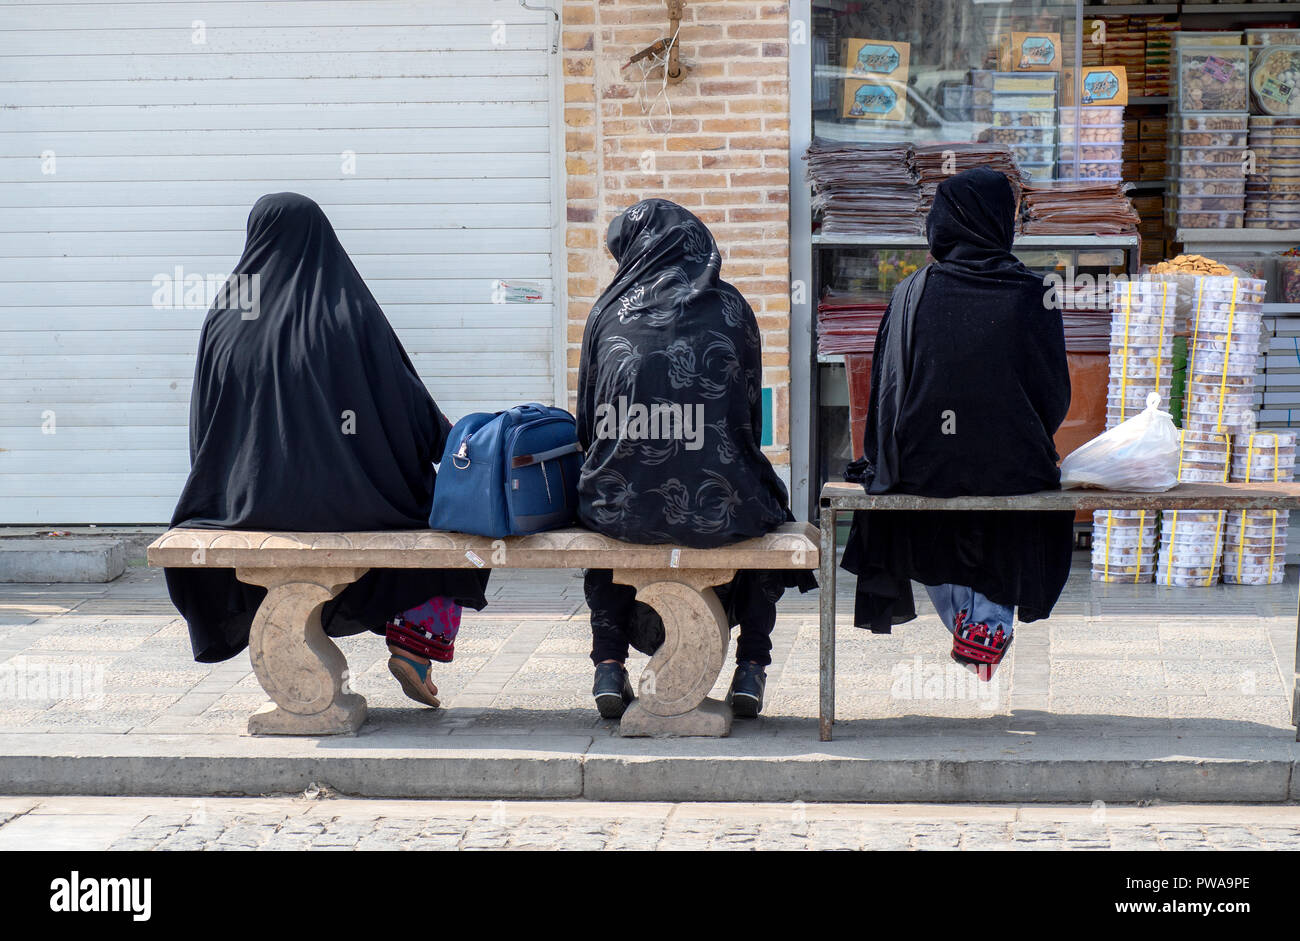 Yazd, Iran - March 7, 2017 : three women with islamic black chador sitting on benches Stock Photo